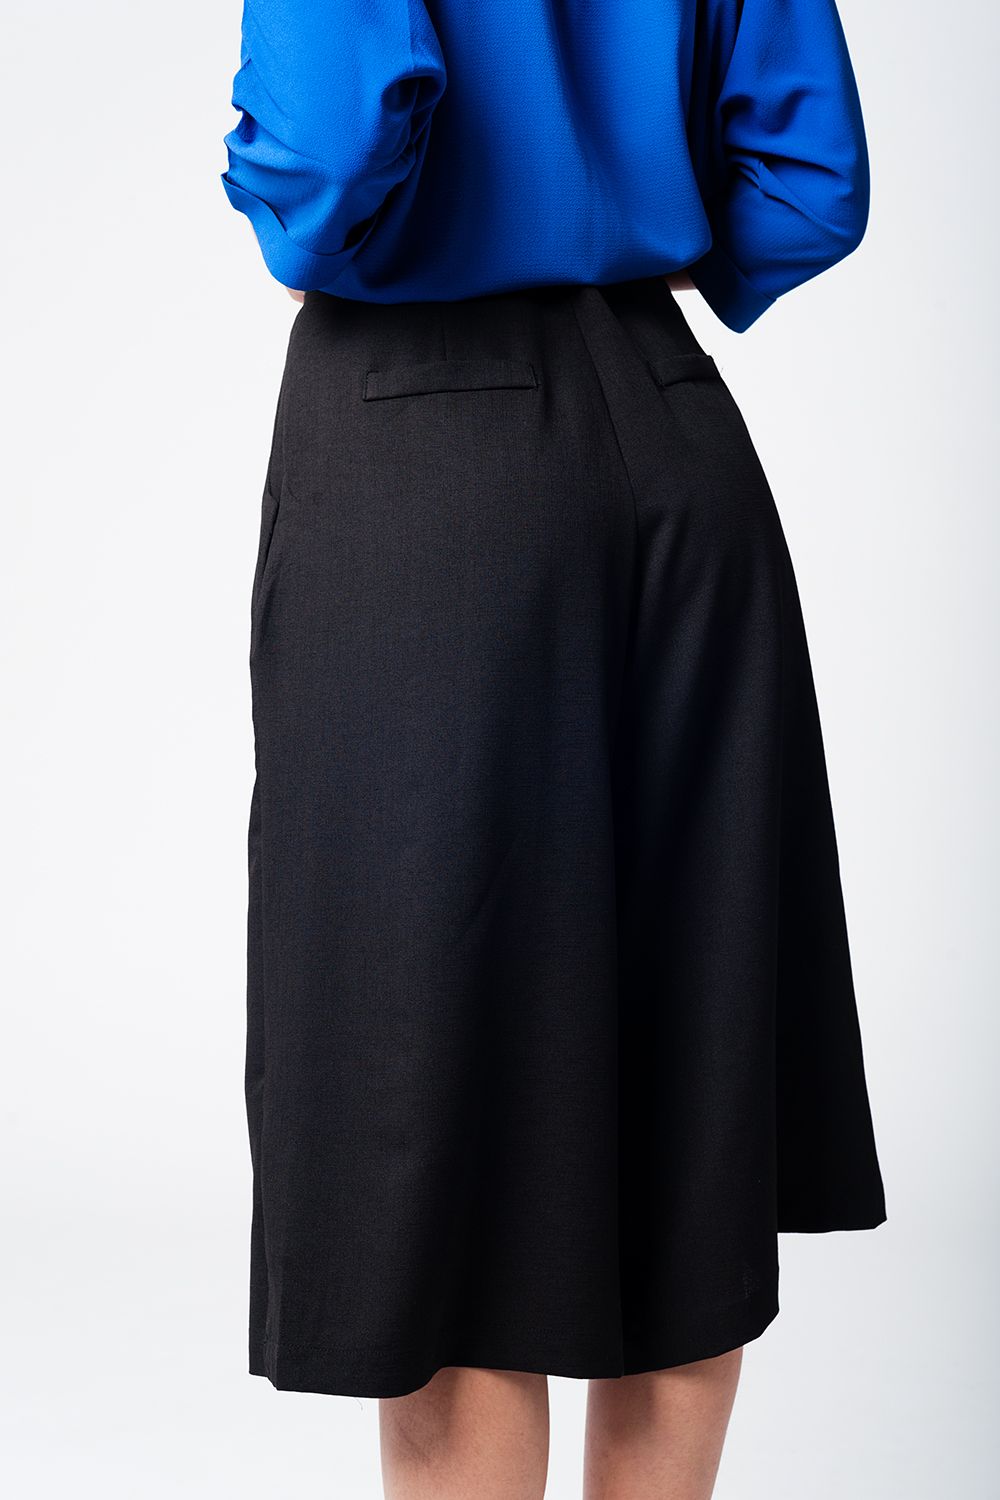 Black Pants Skirt With Silver Buttons - Mack & Harvie